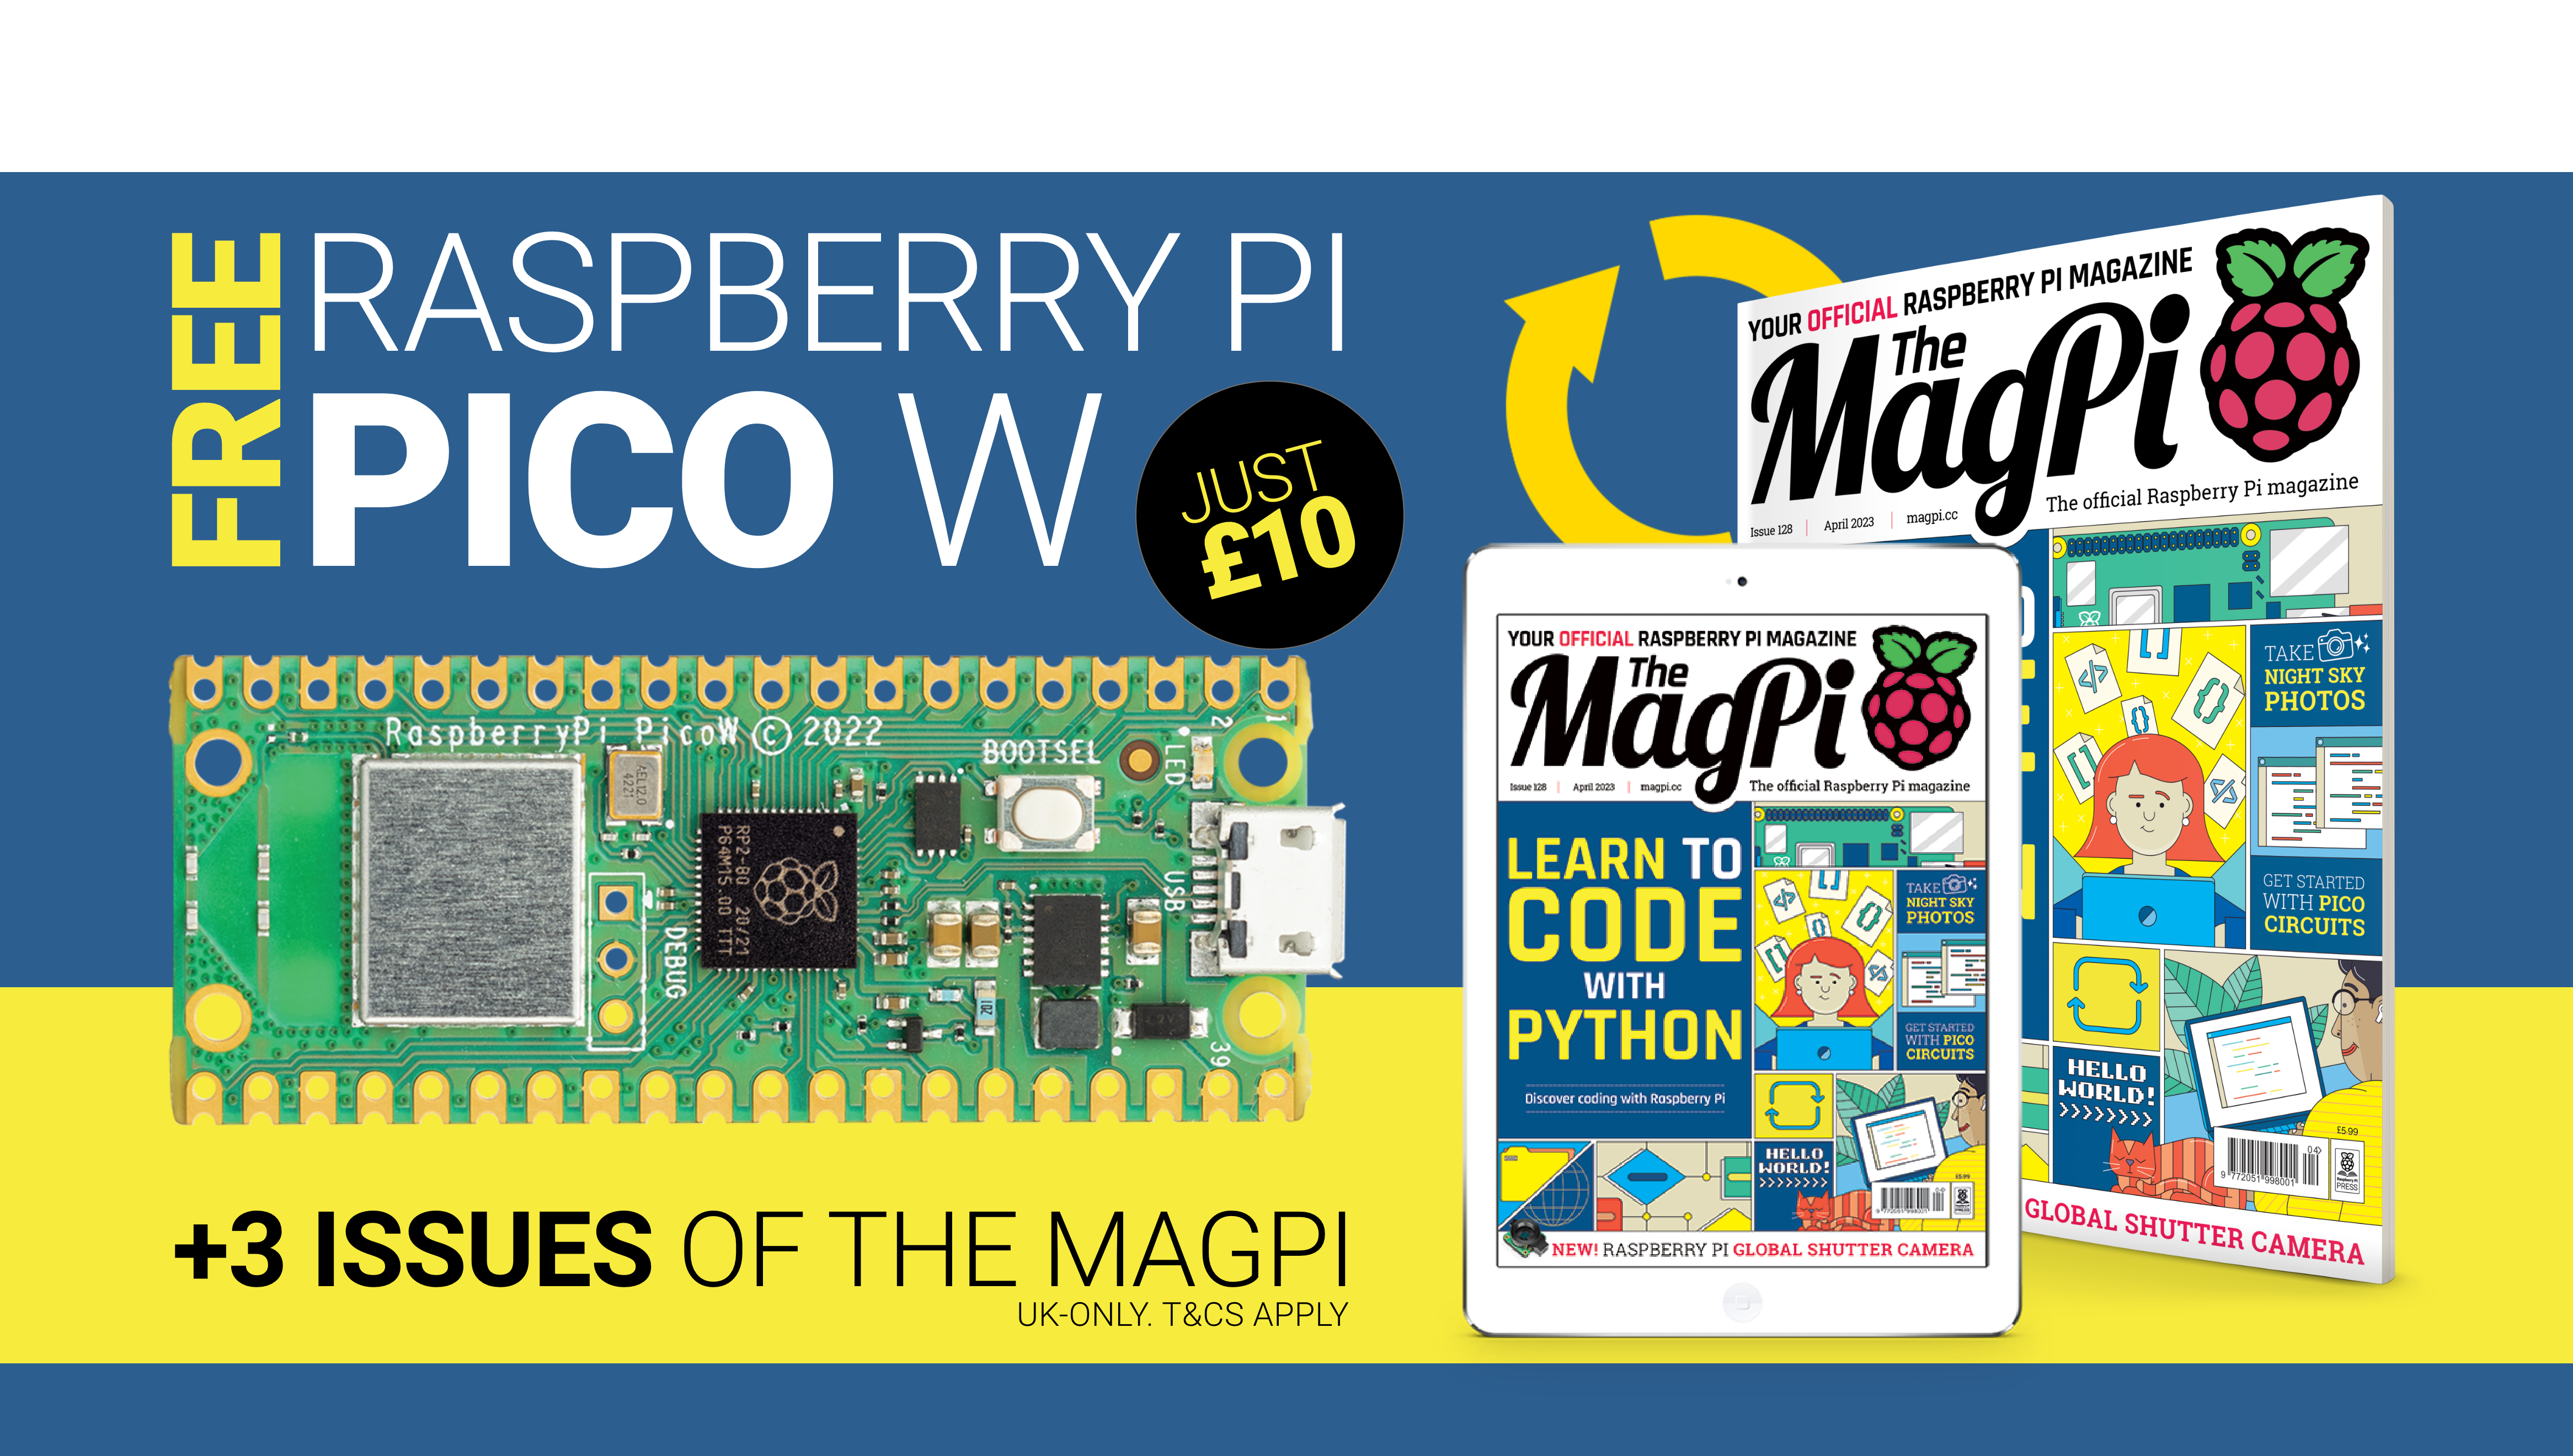 The MagPi issue 128 cover